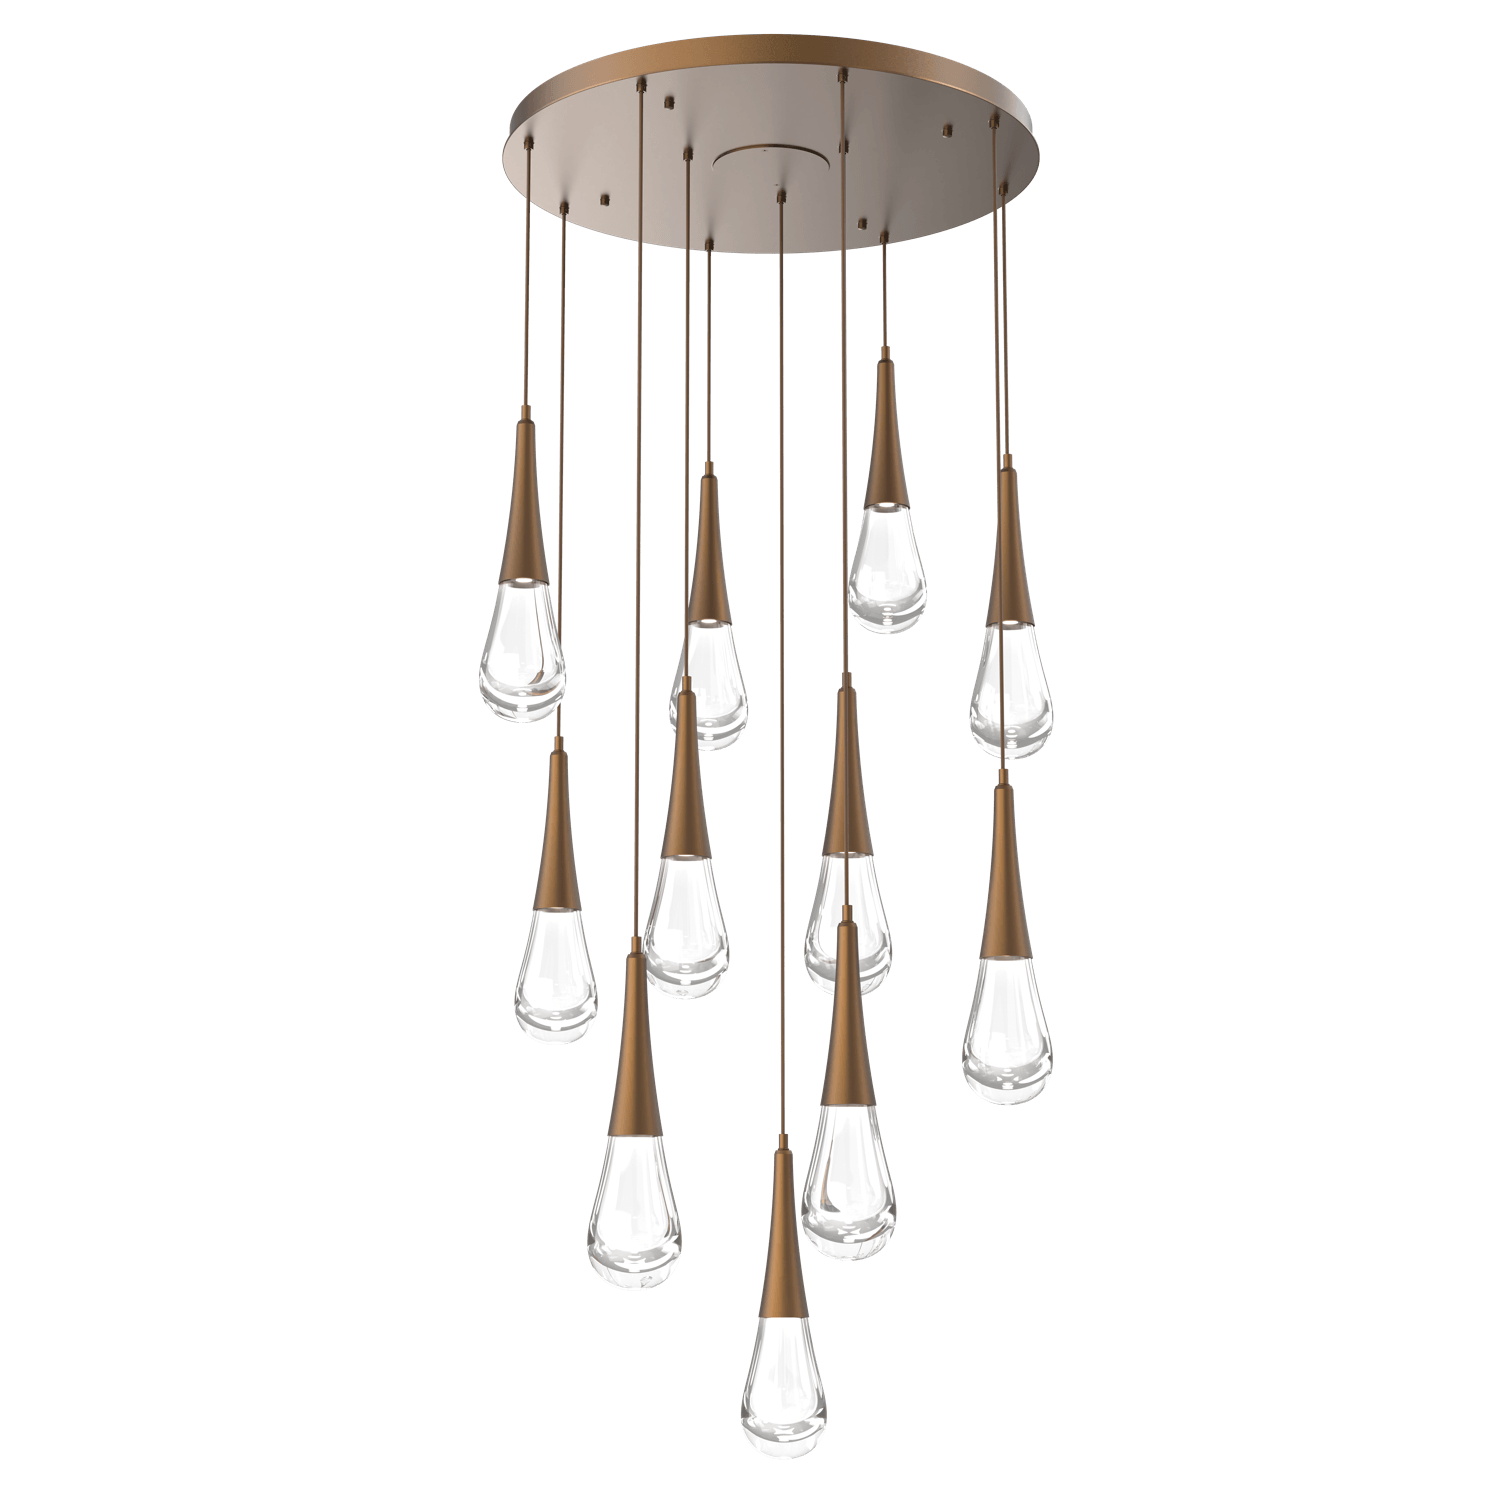 CHB0078-11-FB-Hammerton-Studio-Raindrop-11-light-round-pendant-chandelier-with-flat-bronze-finish-and-clear-blown-glass-shades-and-LED-lamping